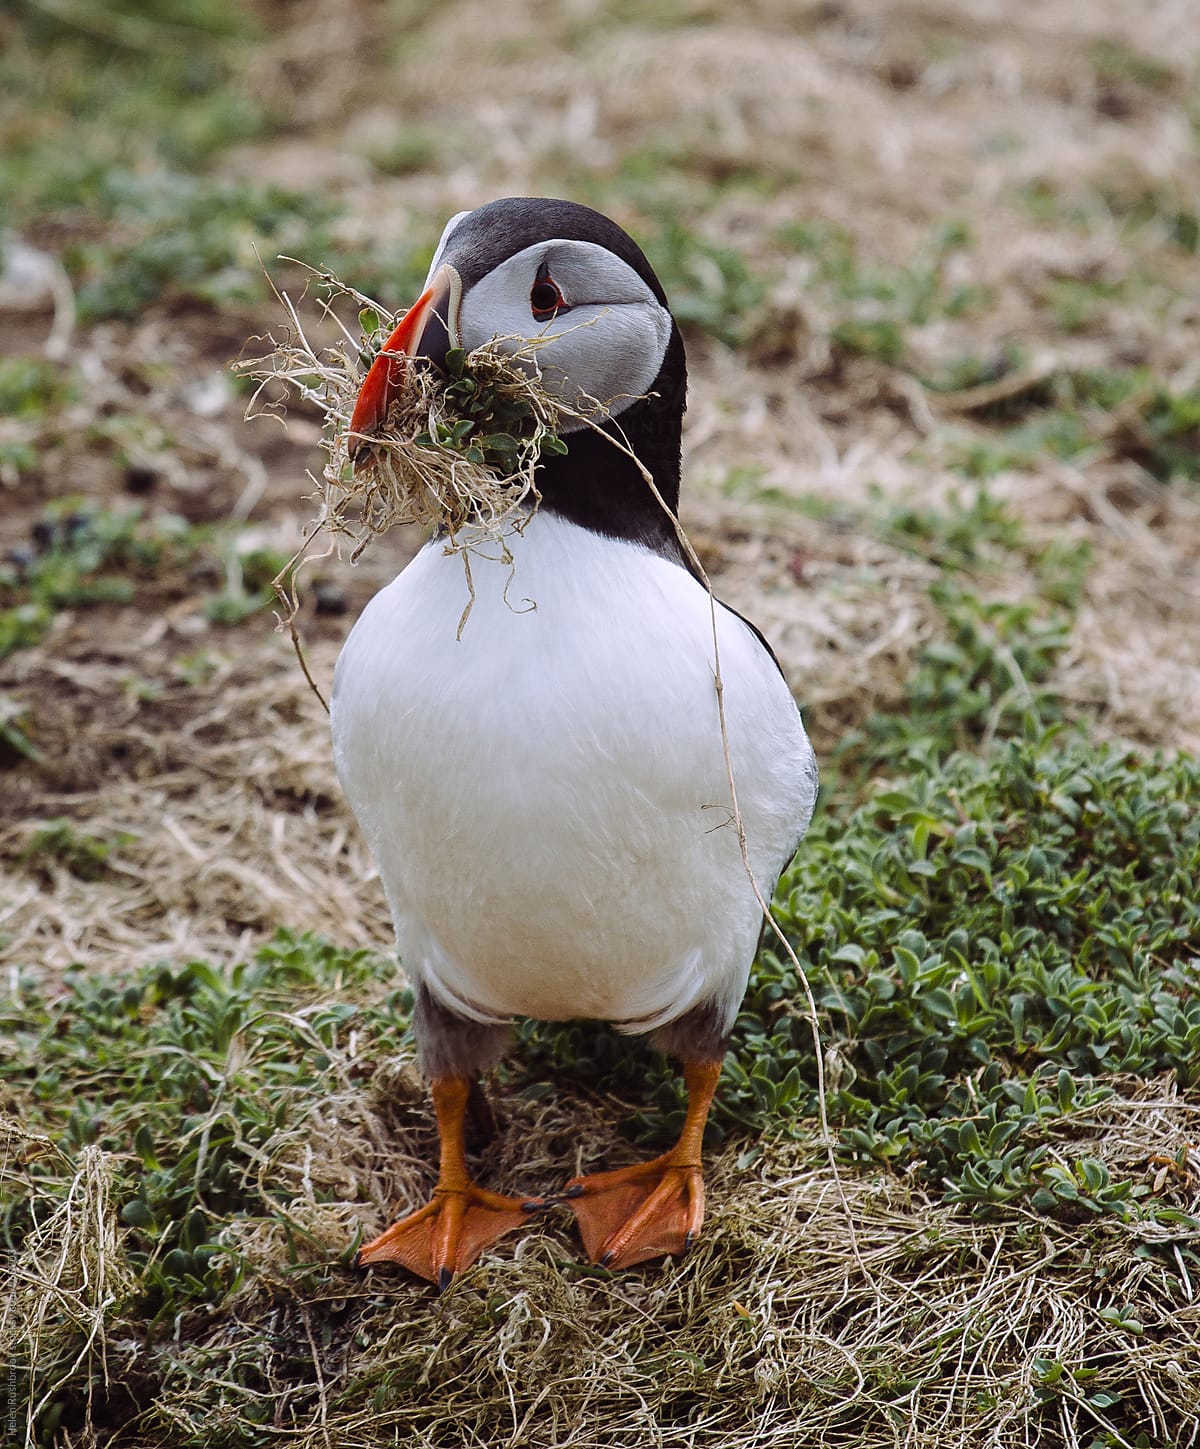 A puffin building a nest